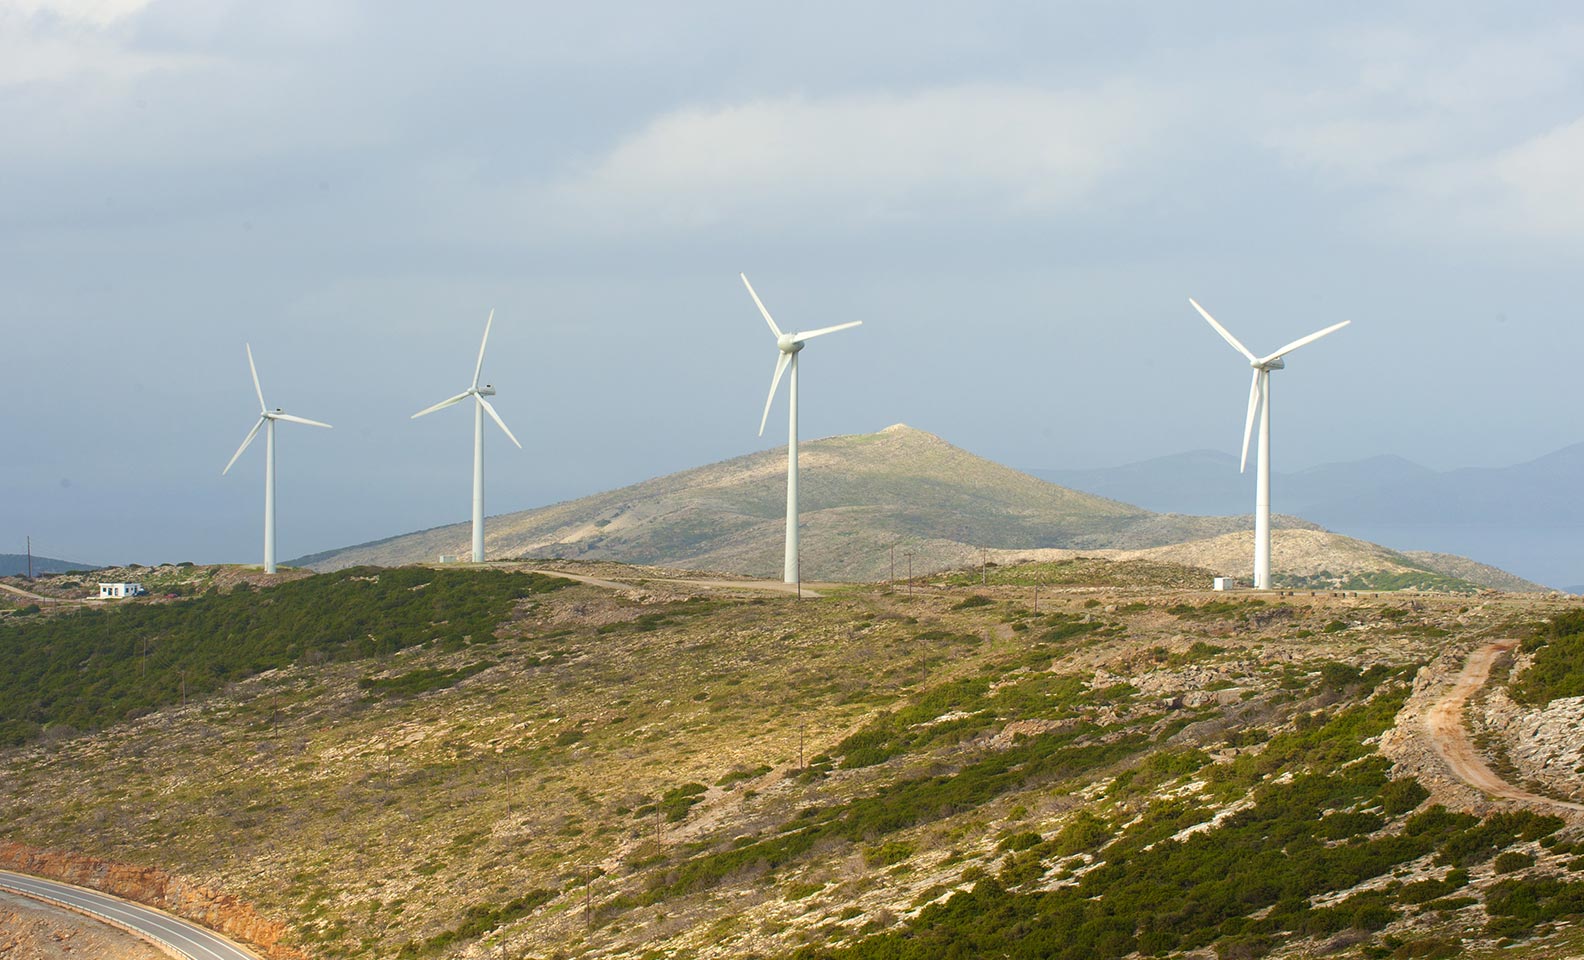 Series of wind turbines in the mountains